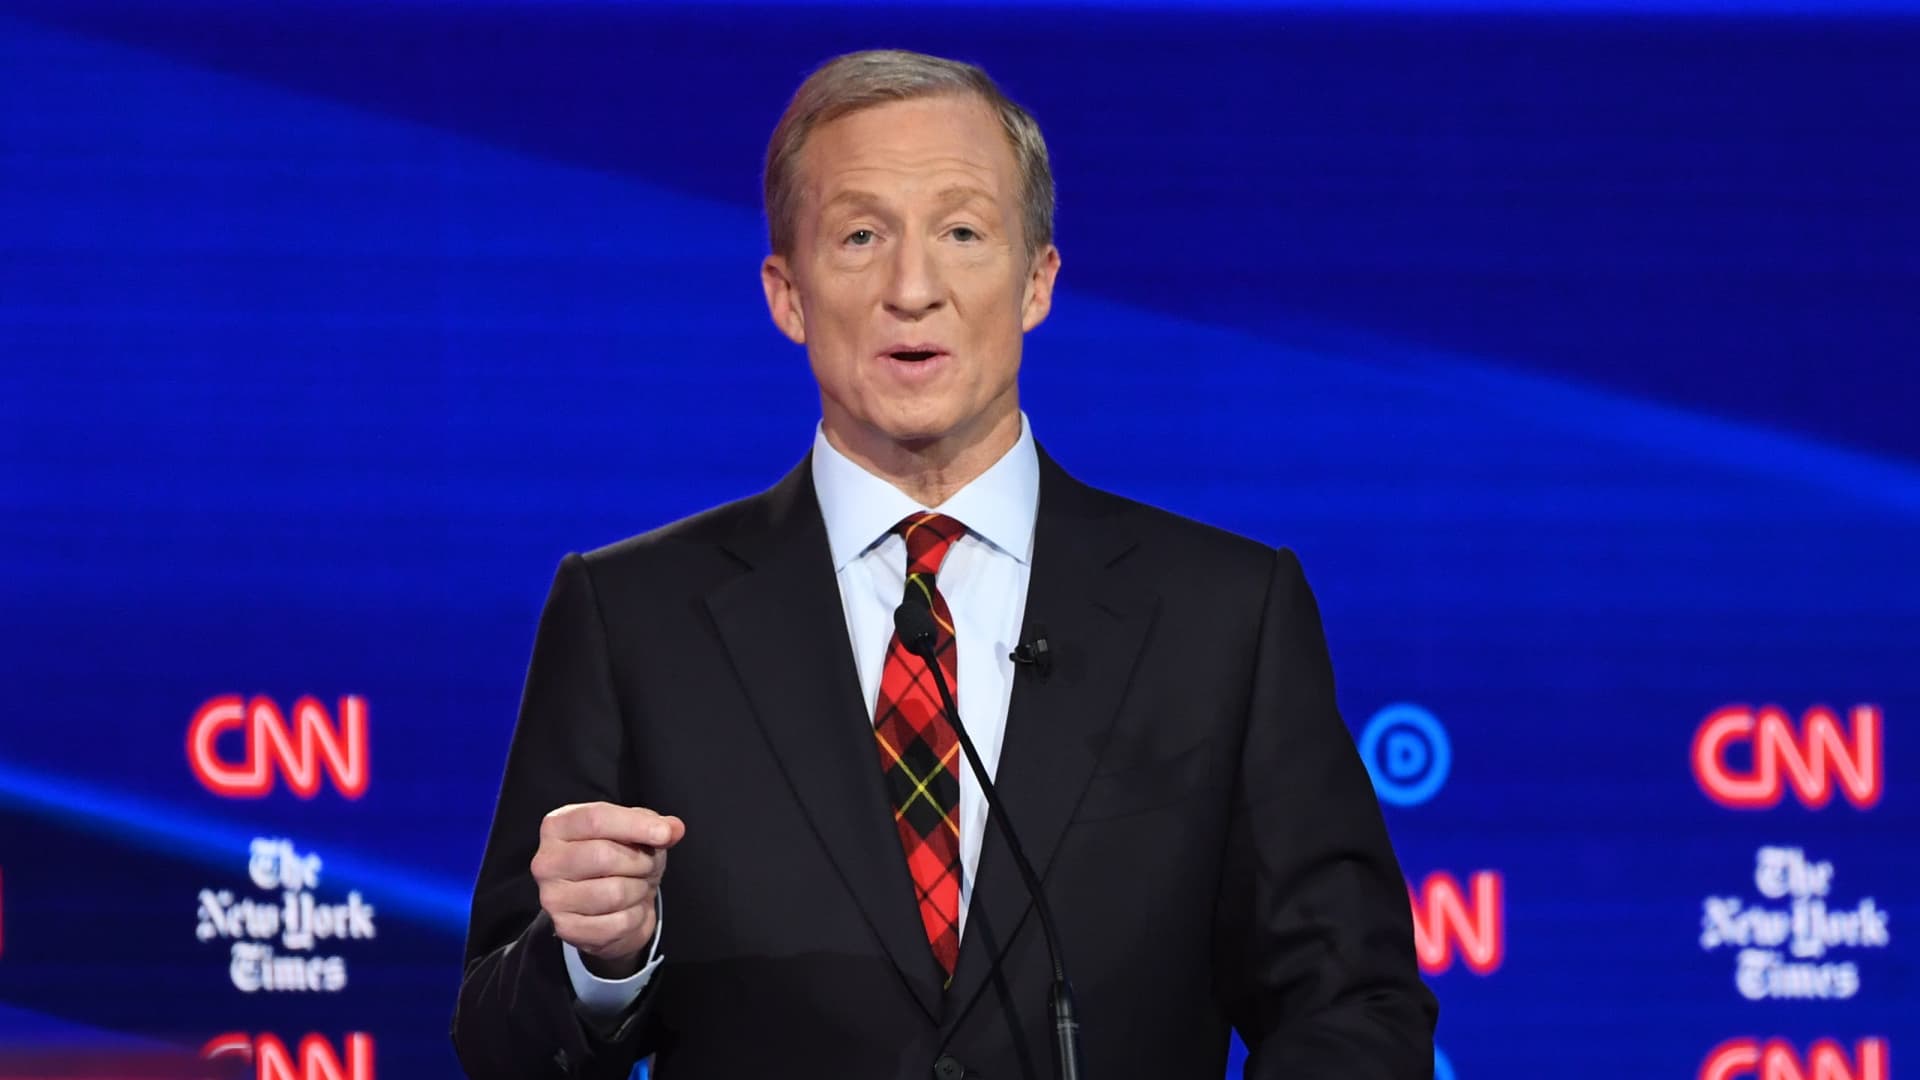 Democratic presidential hopeful businessman Tom Steyer speaks during the fourth Democratic primary debate of the 2020 presidential campaign season co-hosted by The New York Times and CNN at Otterbein University in Westerville, Ohio on October 15, 2019.